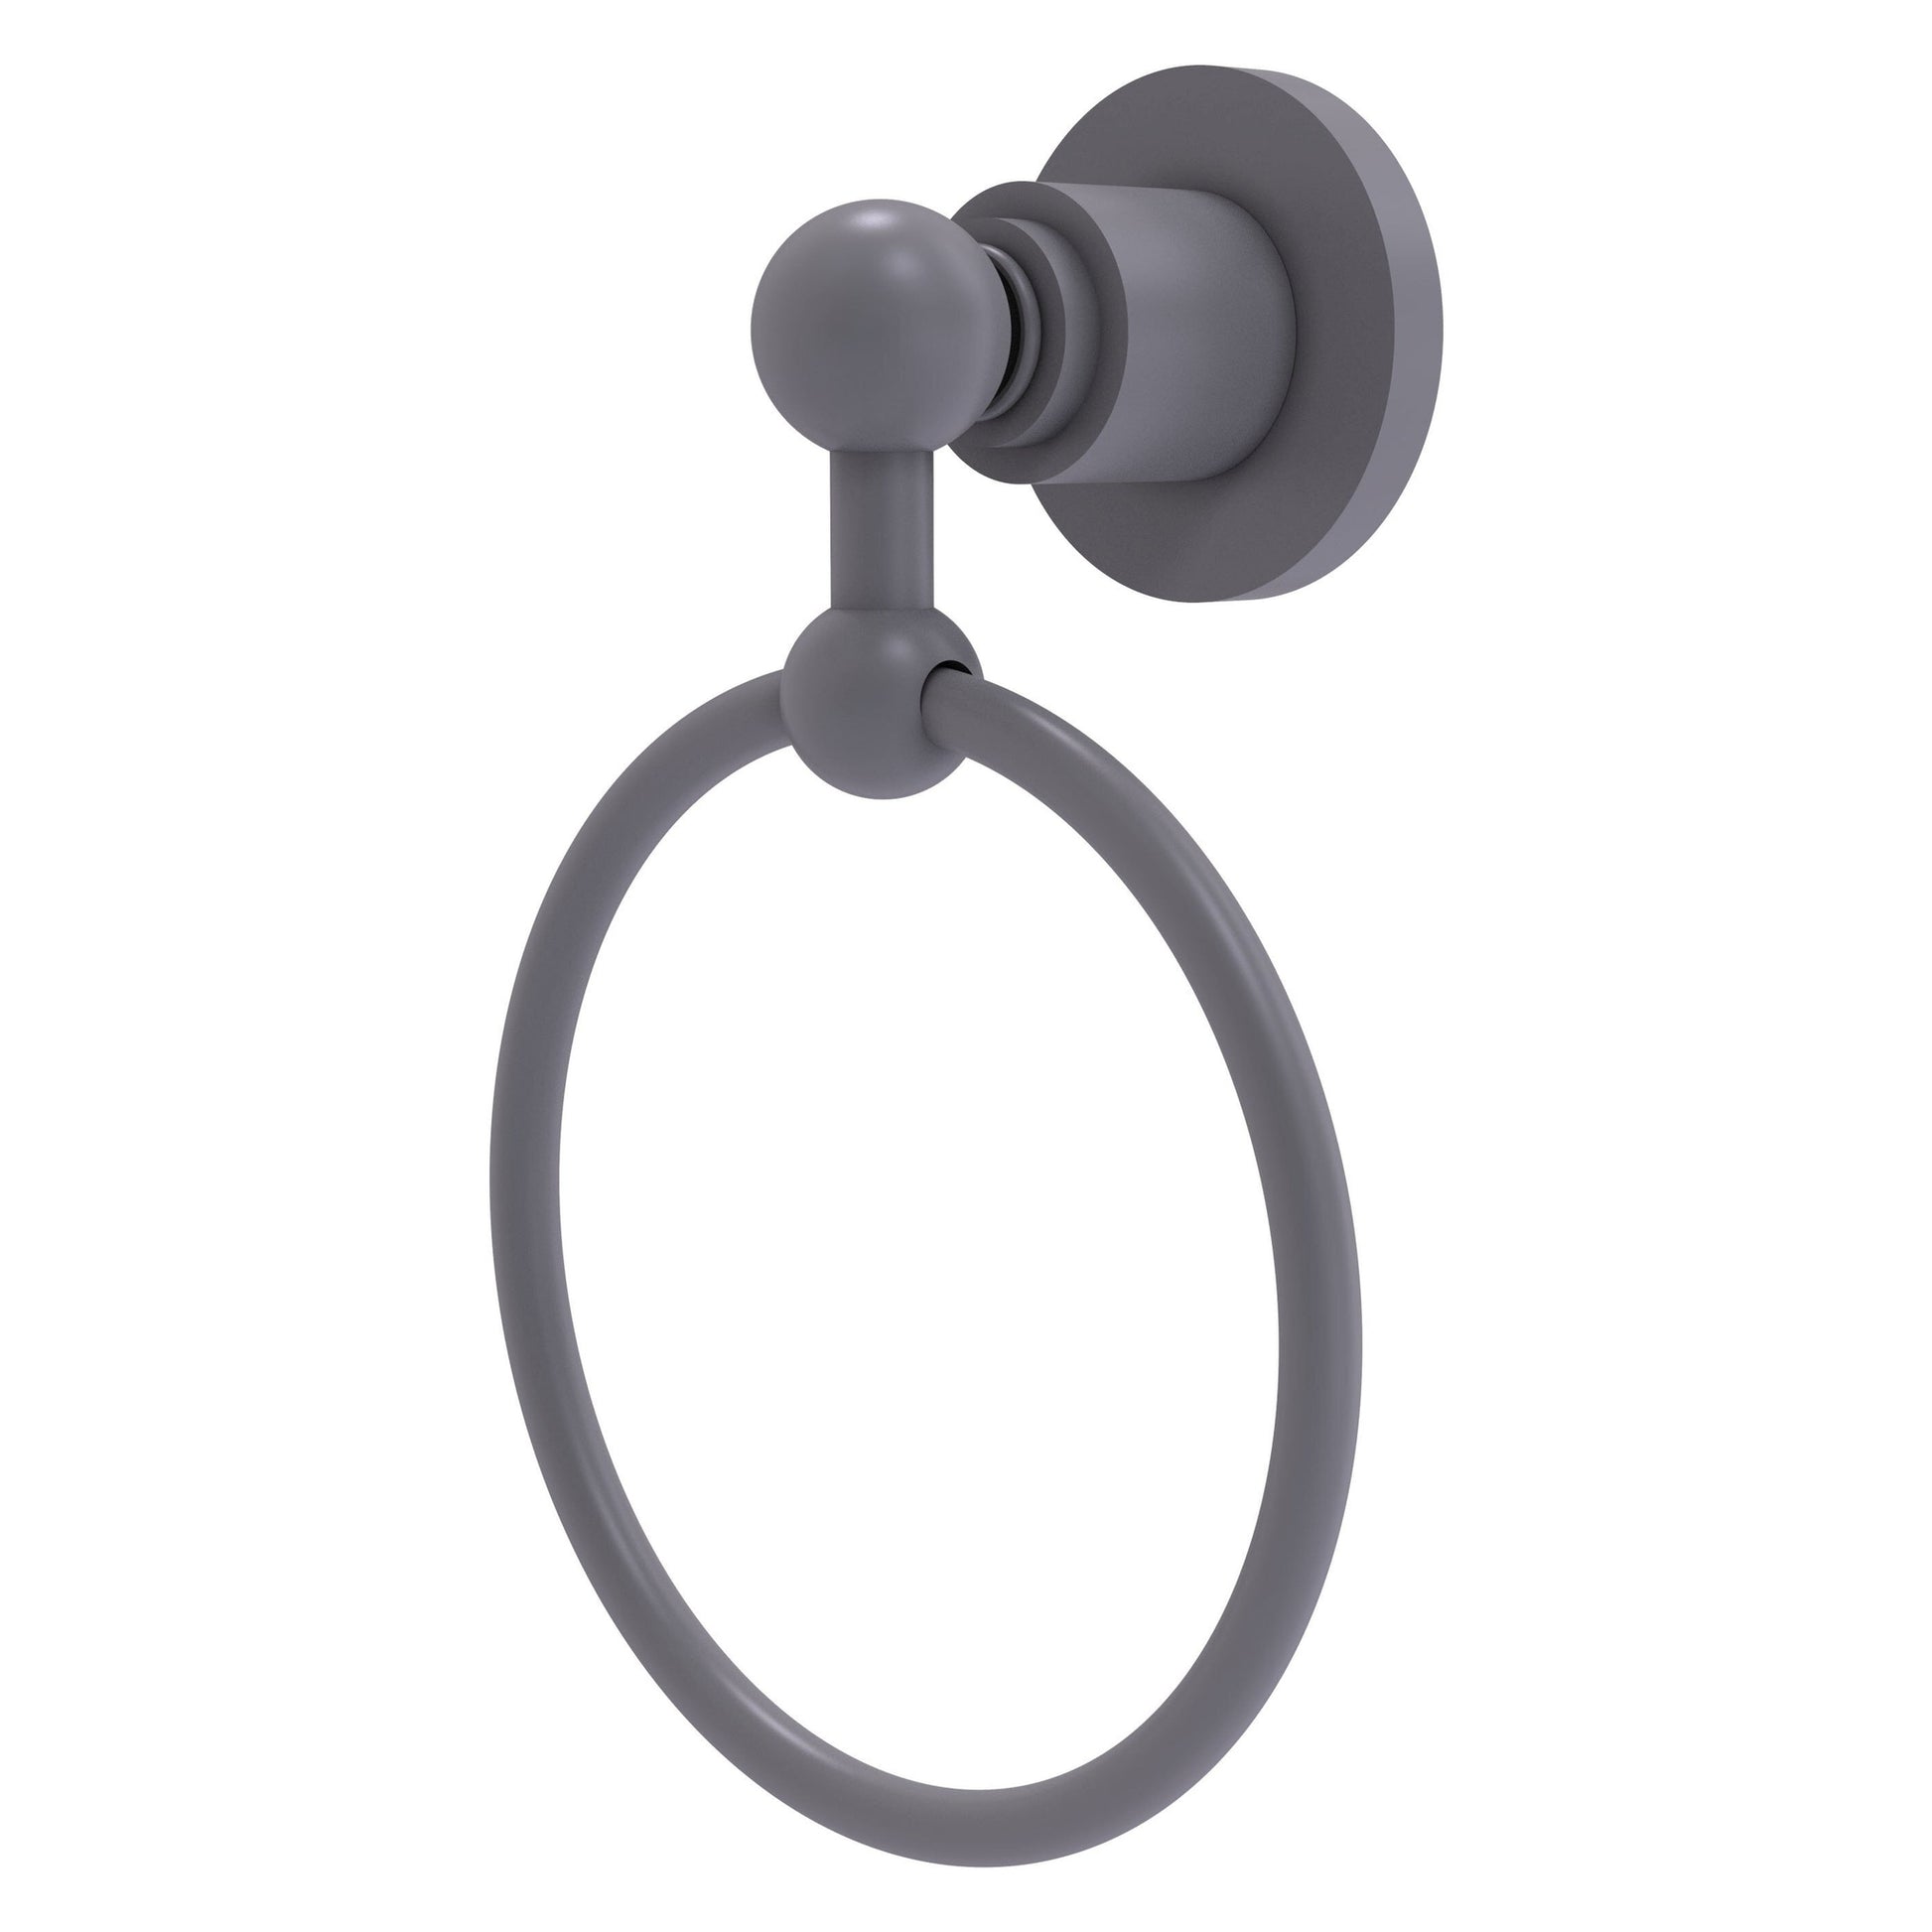 Allied Brass Astor Place 6" x 6" Matte Gray Solid Brass Towel Ring